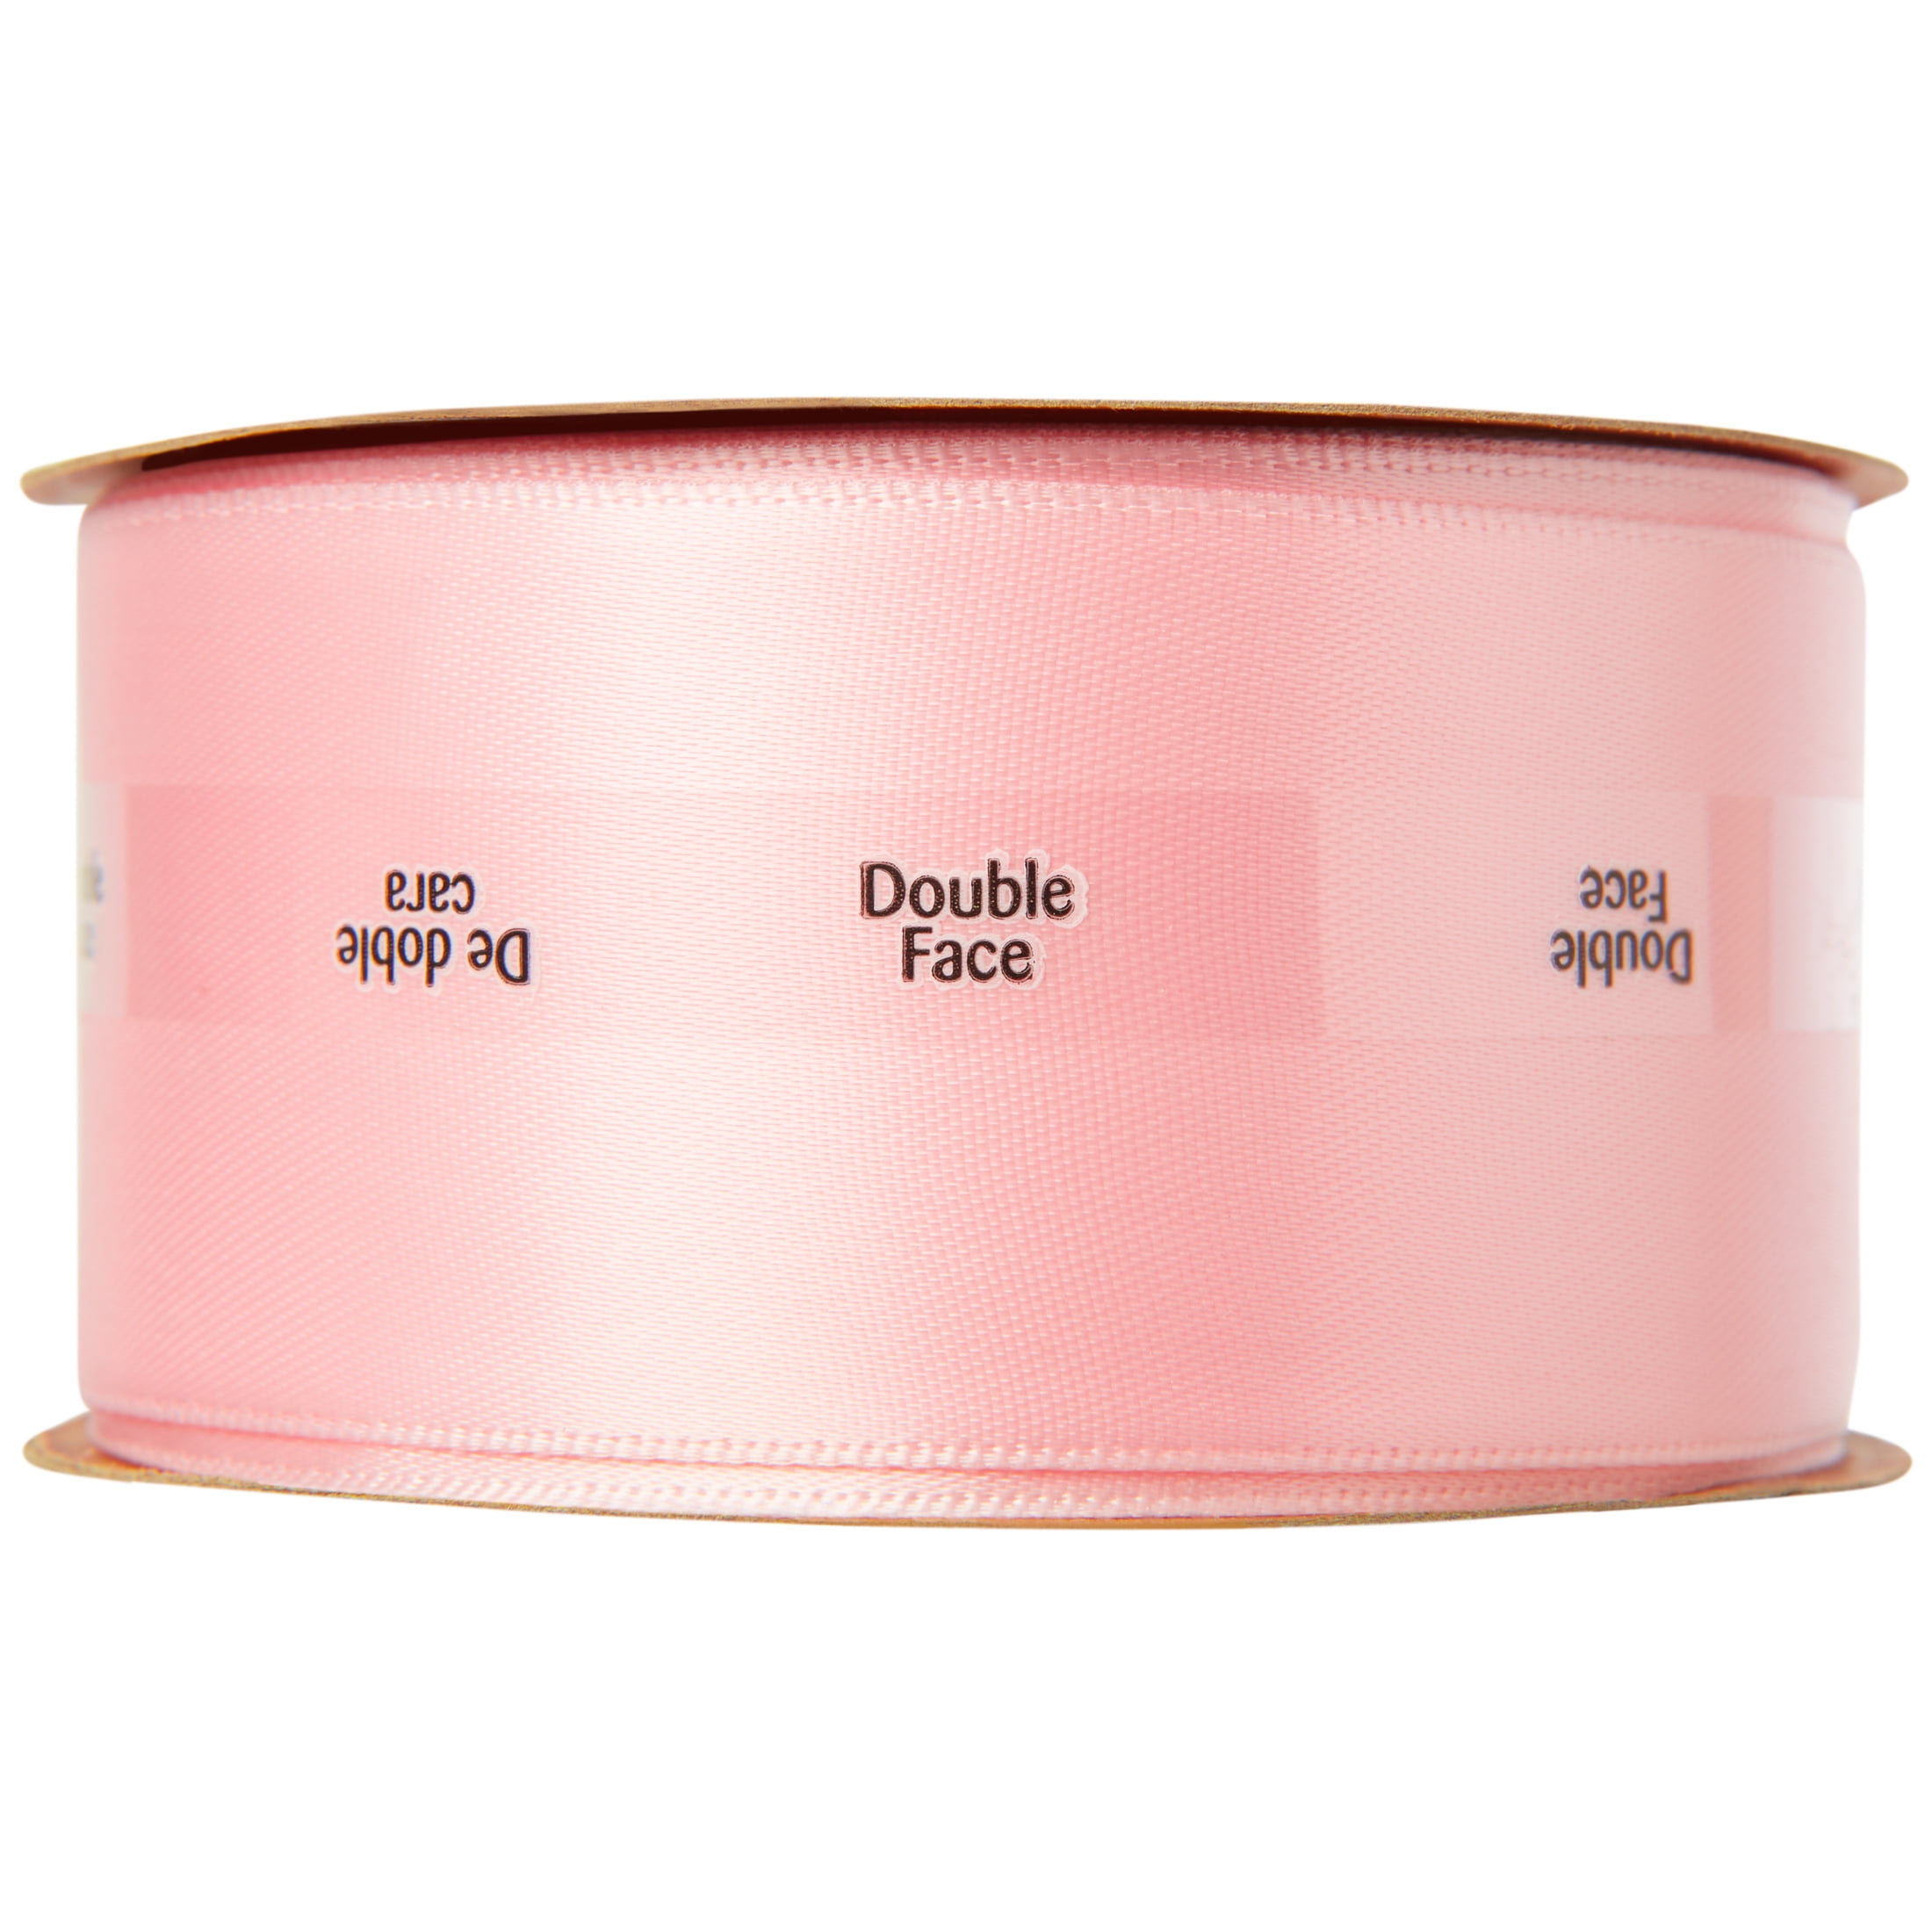 Offray Double Face Satin Ribbon Light Pink